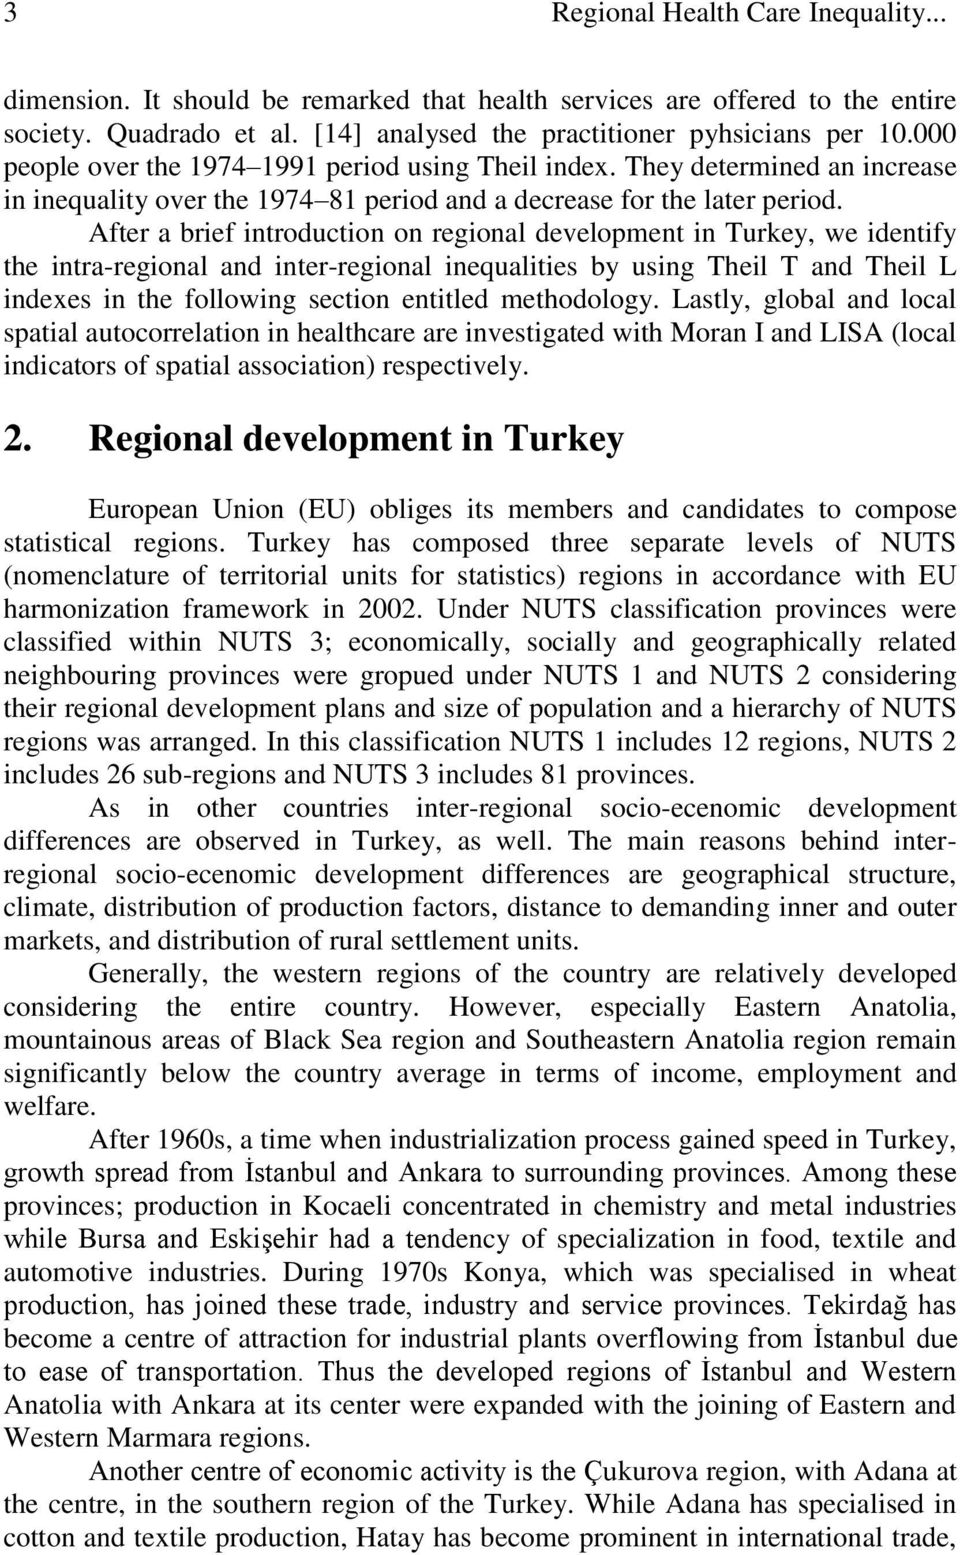 After a brief introduction on regional development in Turkey, we identify the intra-regional and inter-regional inequalities by using Theil T and Theil L indexes in the following section entitled